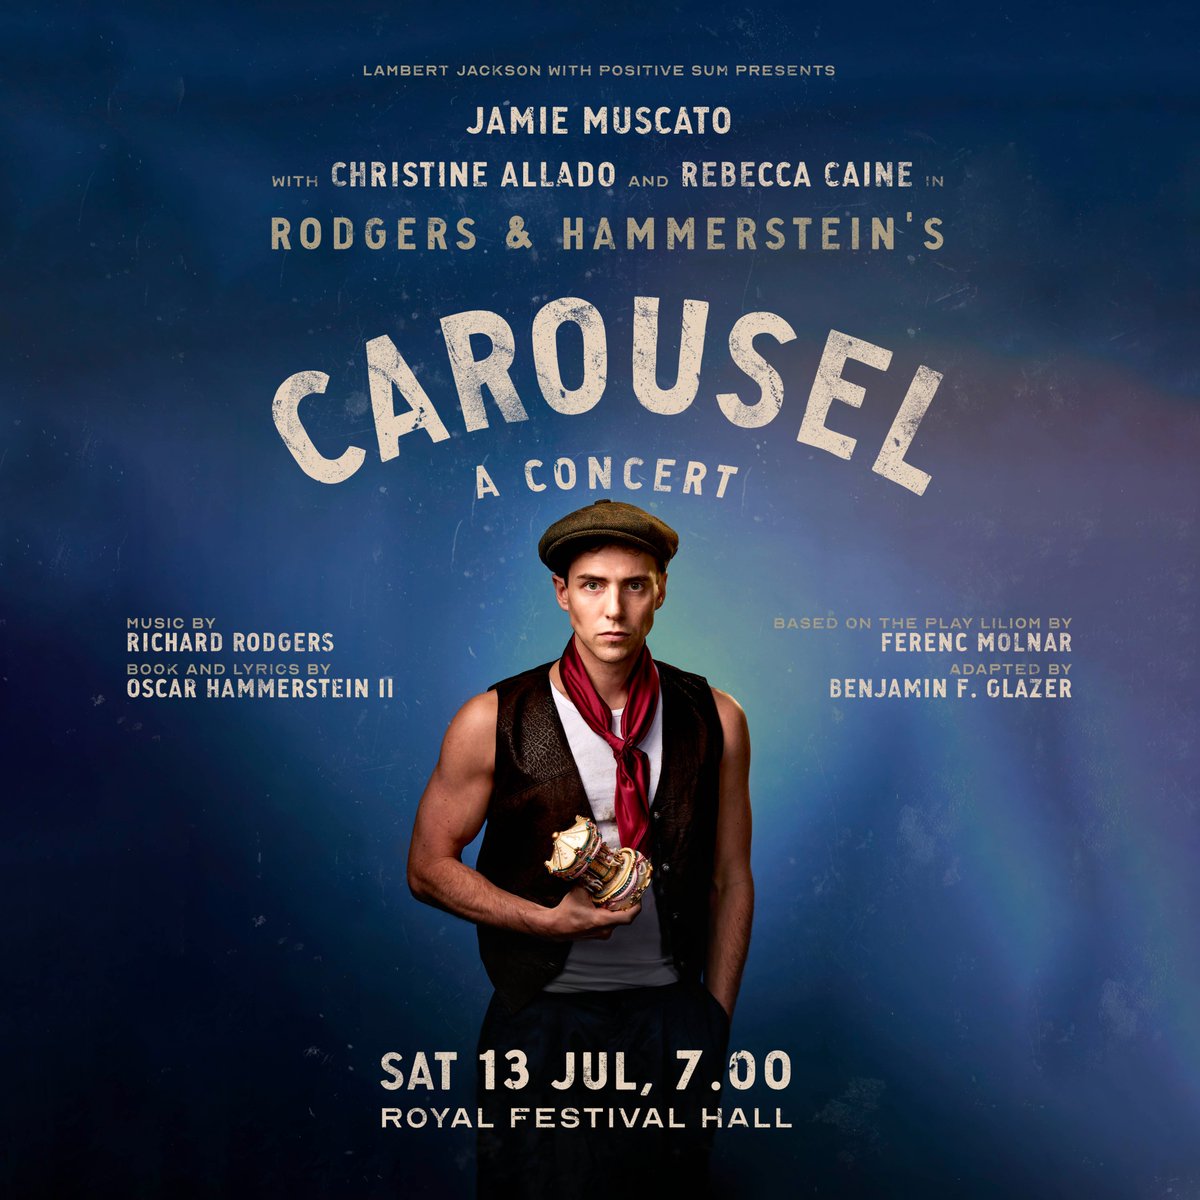 #NEWS

Carousel in Concert at the Royal Festival Hall 13 July 2024

fairypoweredproductions.com/carousel-in-co…

#carousel #carouselinconcert #royalfestivalhalltheatrelondon #royalfestivalhalltheatre #theatrelondon #royalfestivalhall #theatre #london #fairypoweredproductions